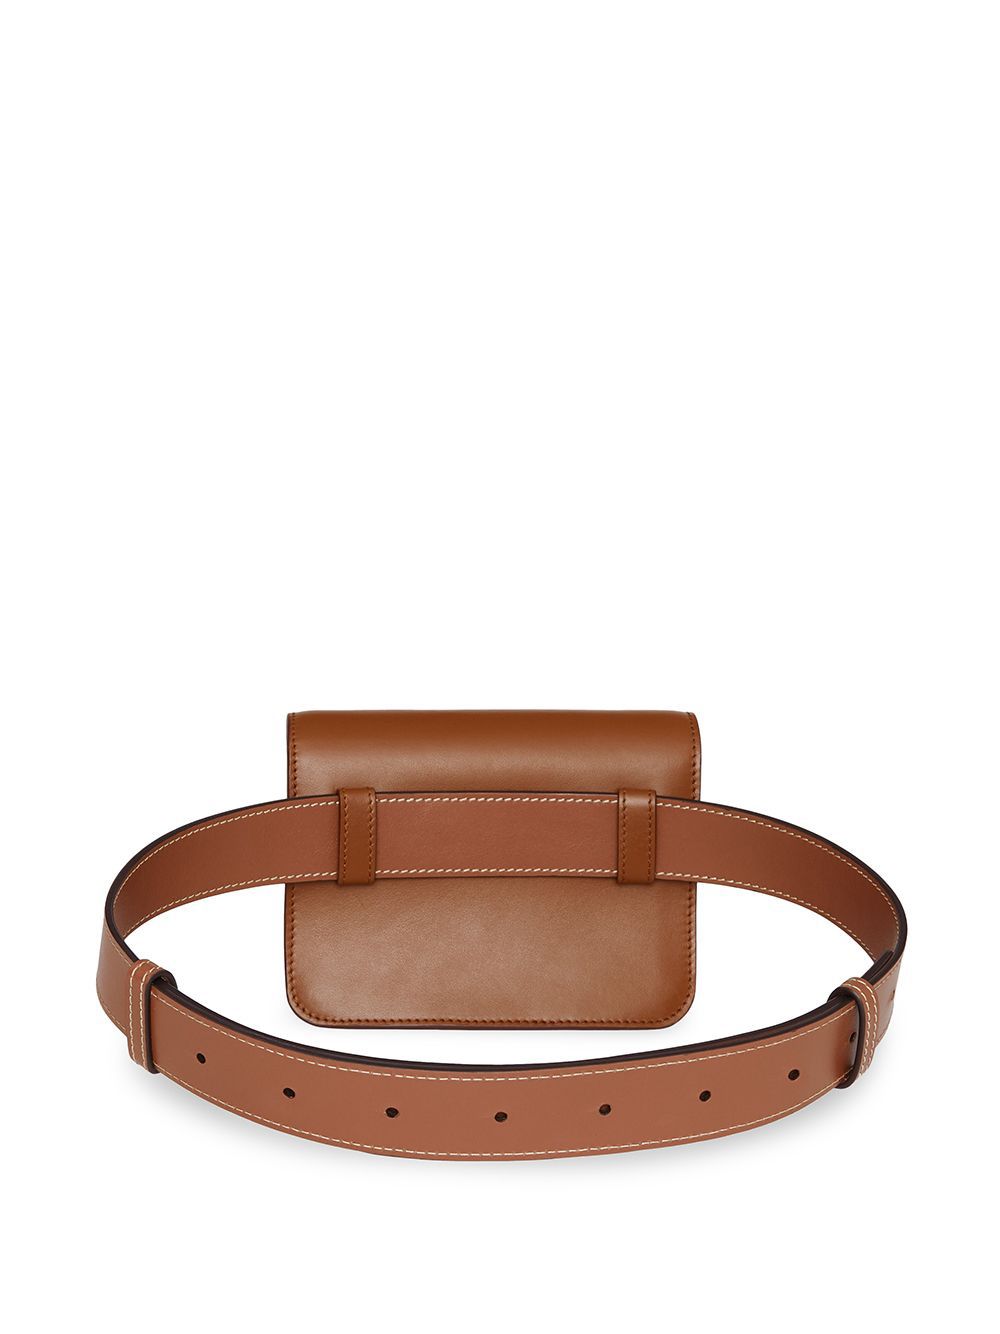 Burberry 'tb' Monogram Clasp Leather Belt Bag in Brown for Men